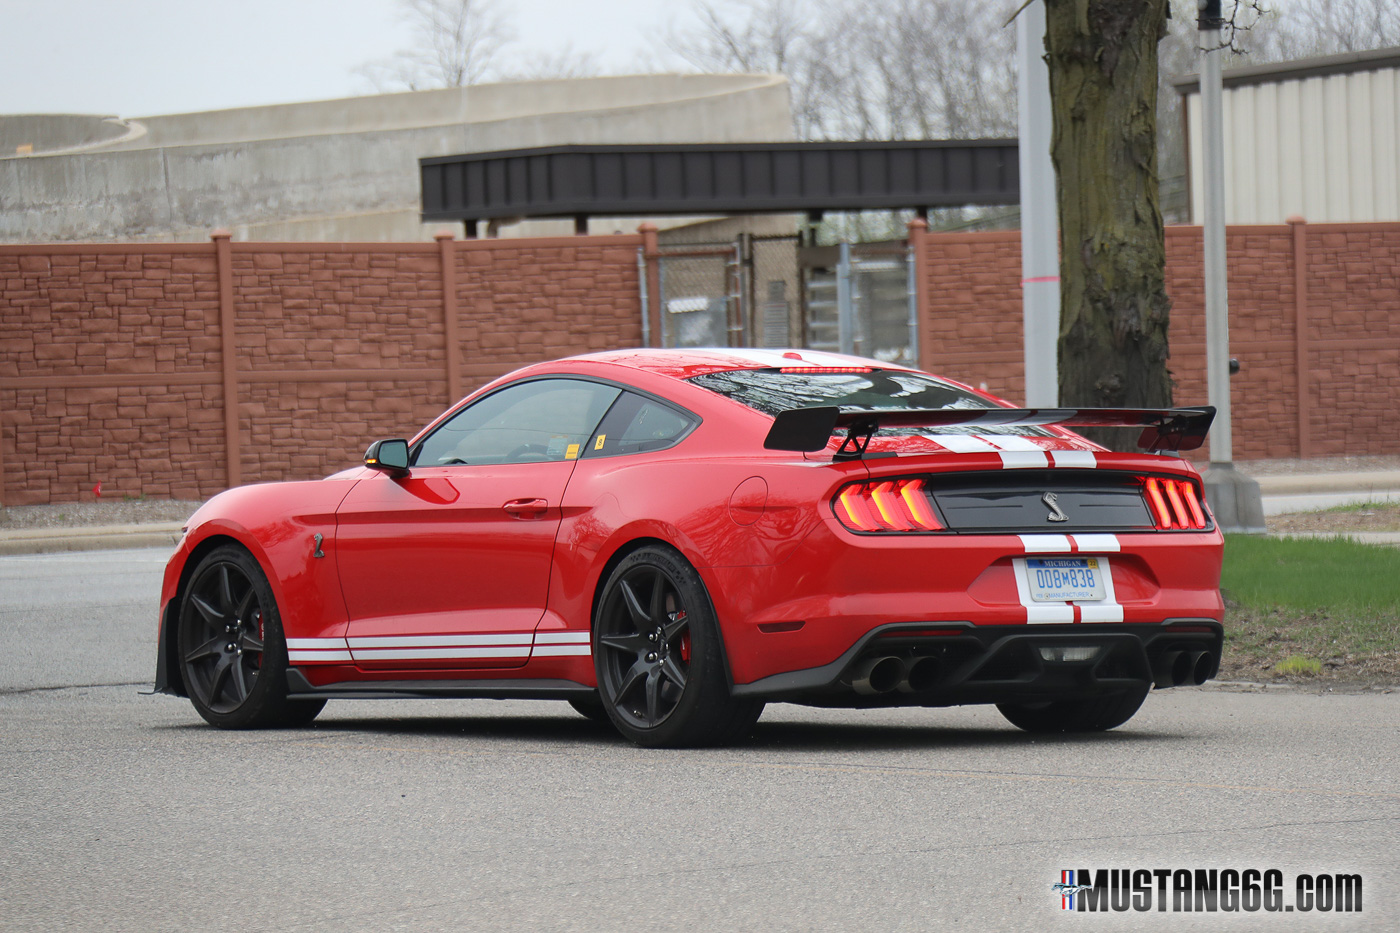 Spied: 2020 Shelby GT500 in Race Red and Grabber Lime | 2015+ S550 Mustang Forum (GT, EcoBoost